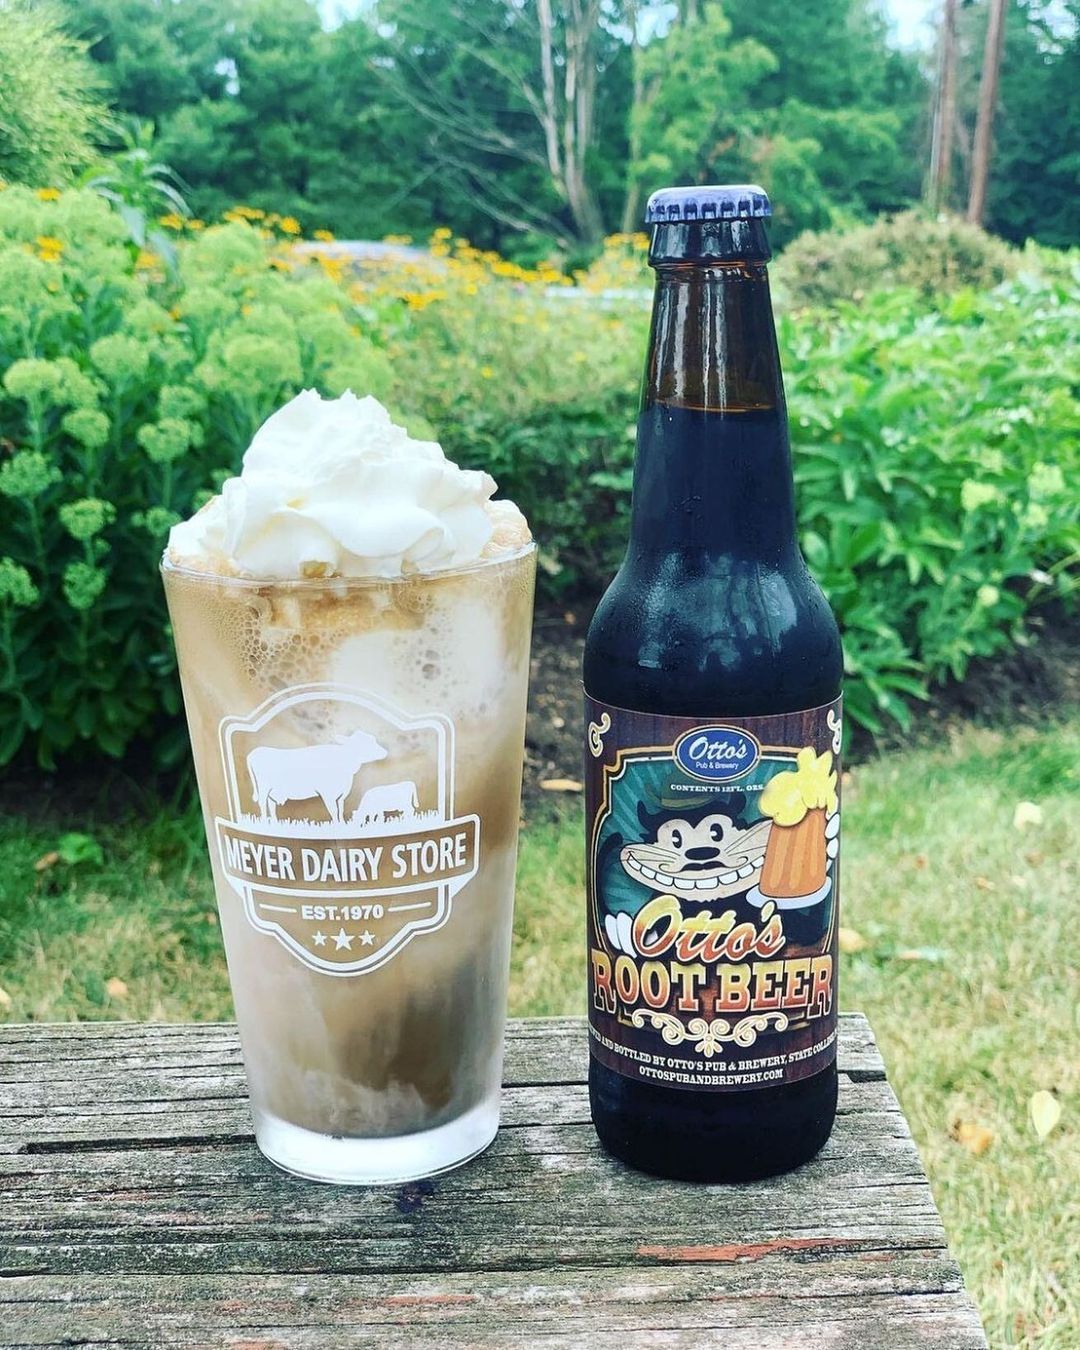 Did you know at Meyer Dairy you can have their delicious ice cream paired with @ottospubandbrewery root beer! 